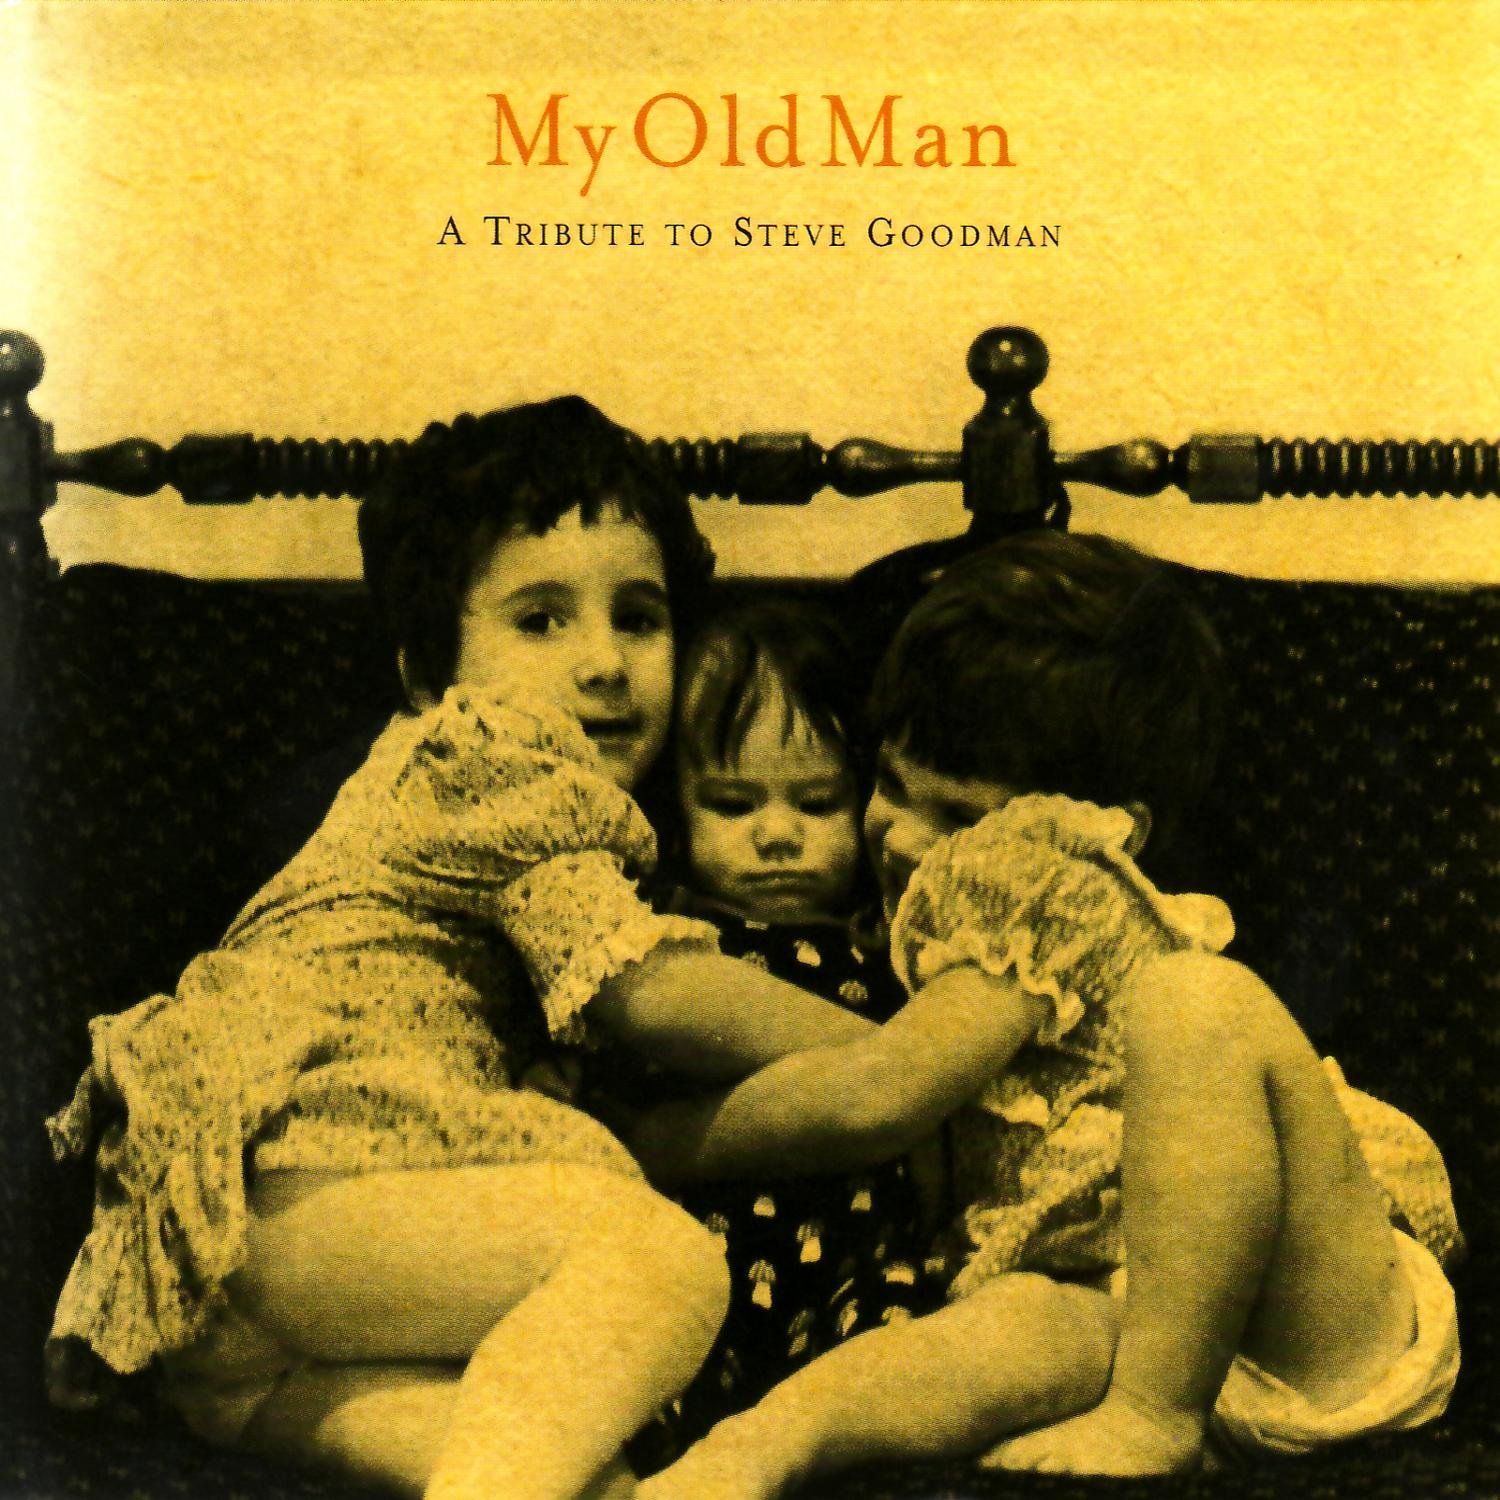 My Old Man: A Tribute To Steve Goodman